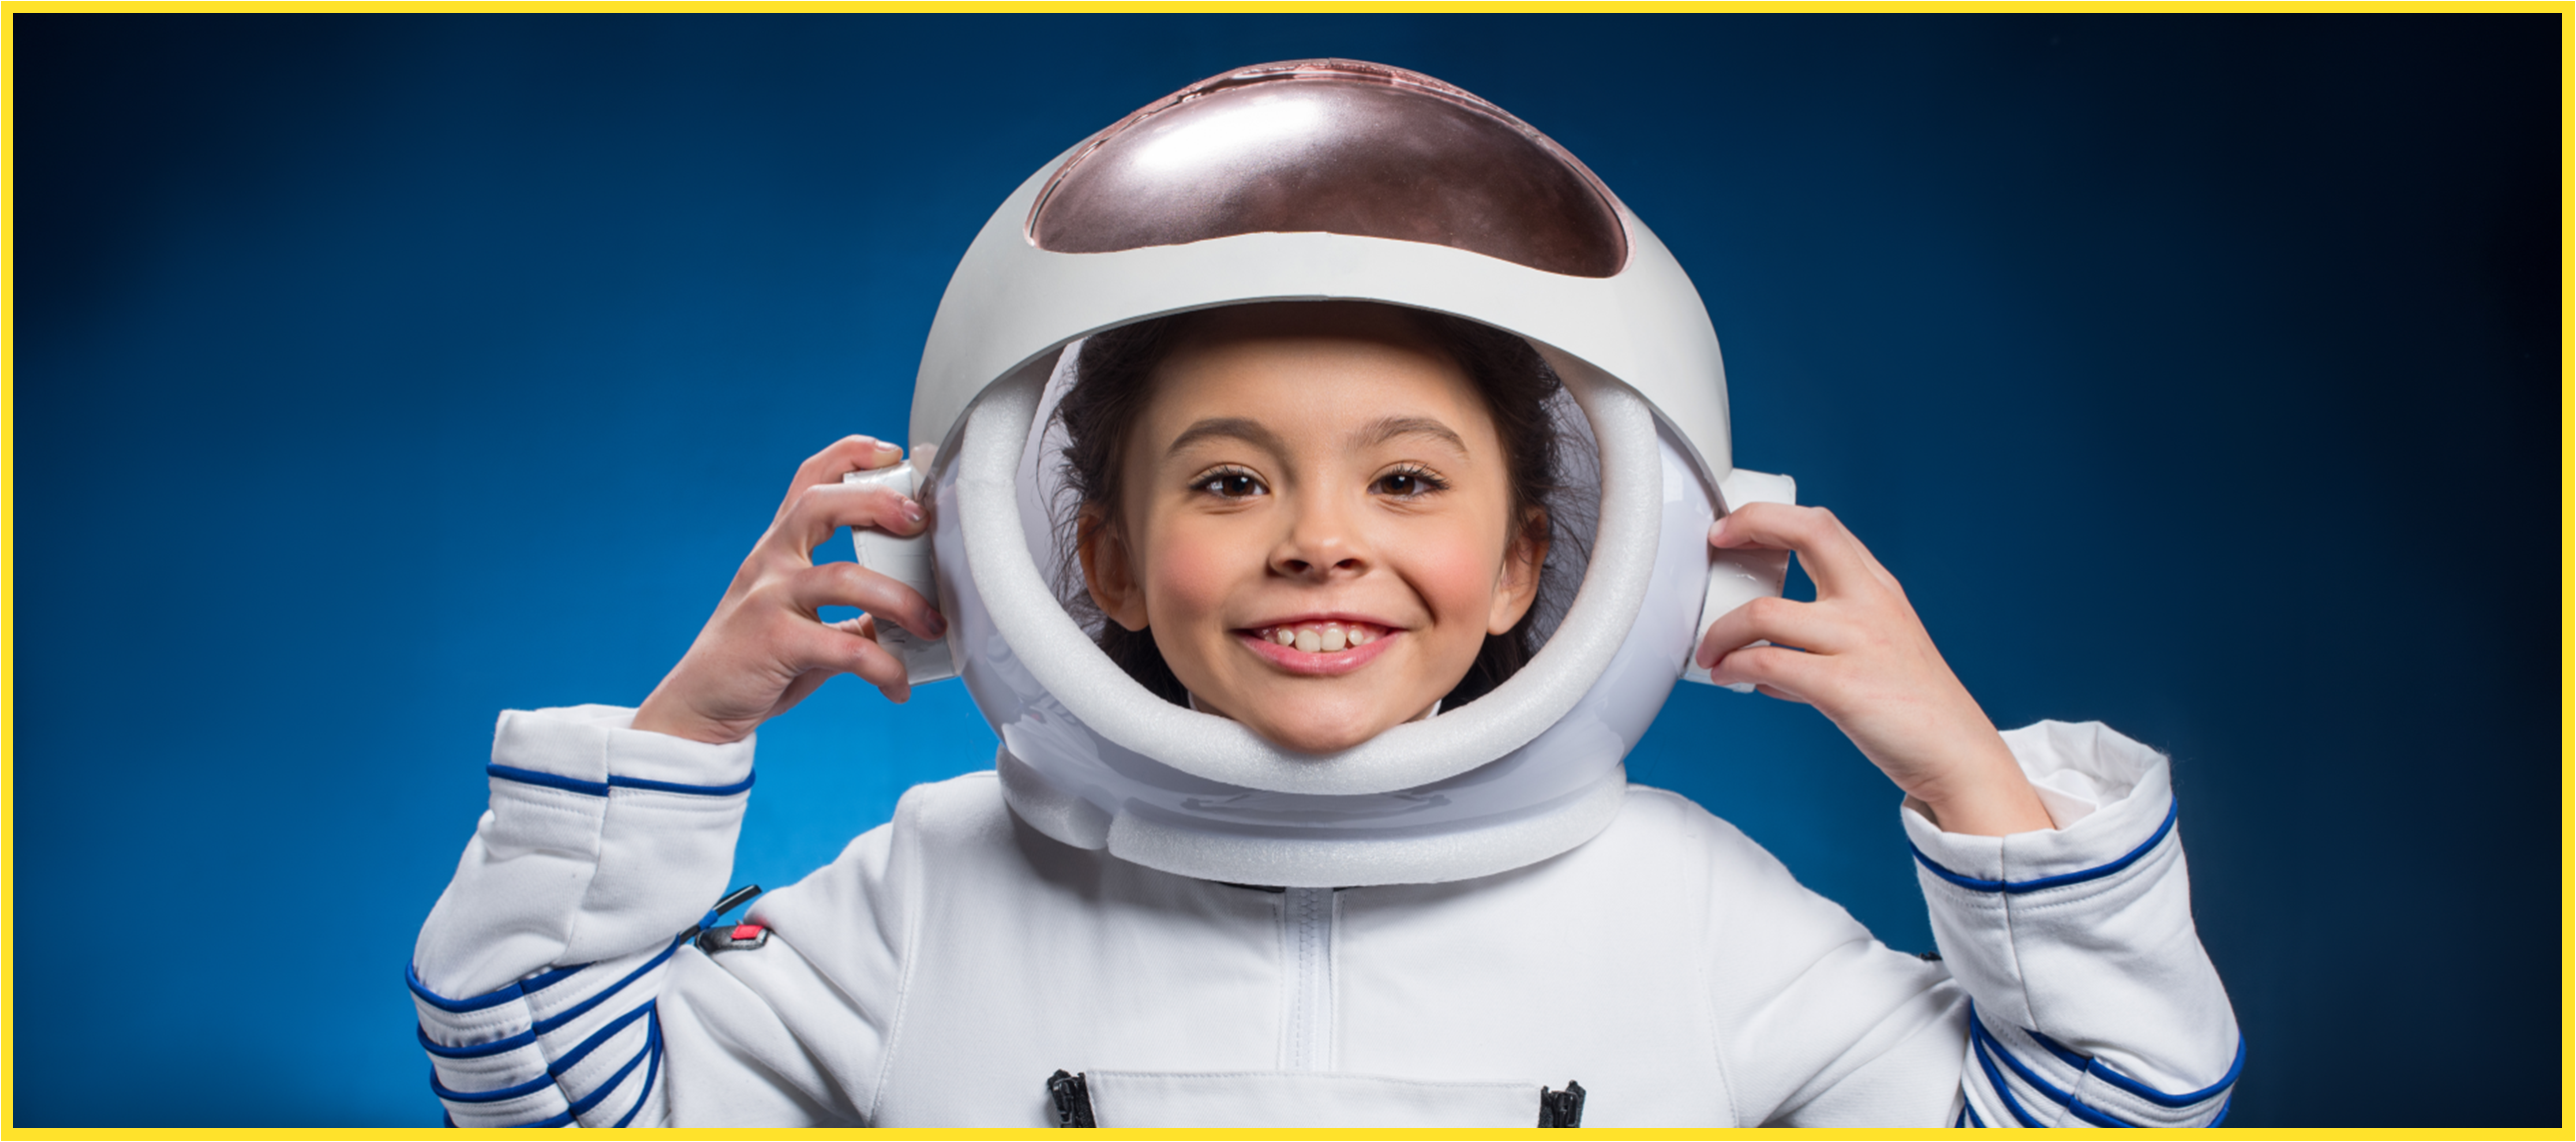 Kid smiling wearing an astronaut suit